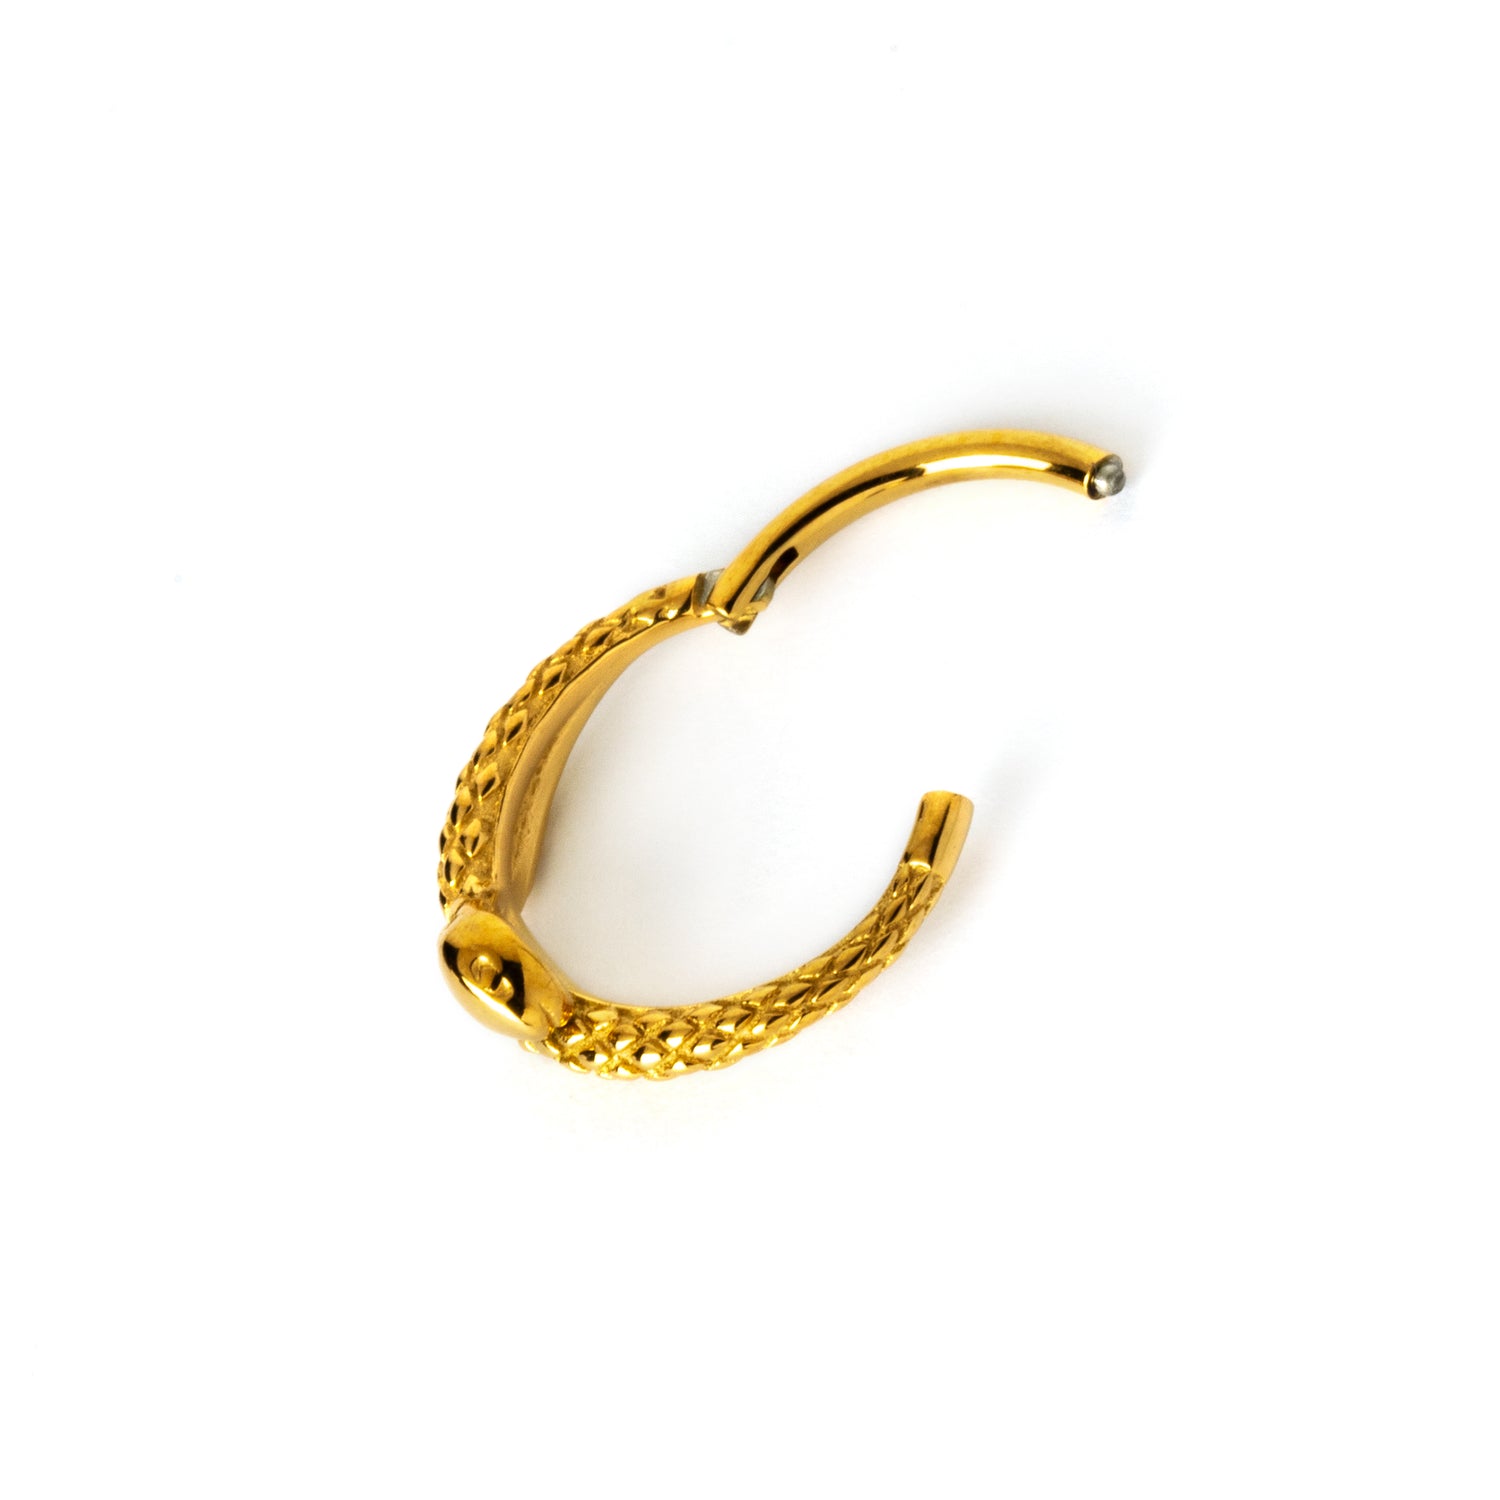 surgical steel with gold coating clicker piercing ring closure view